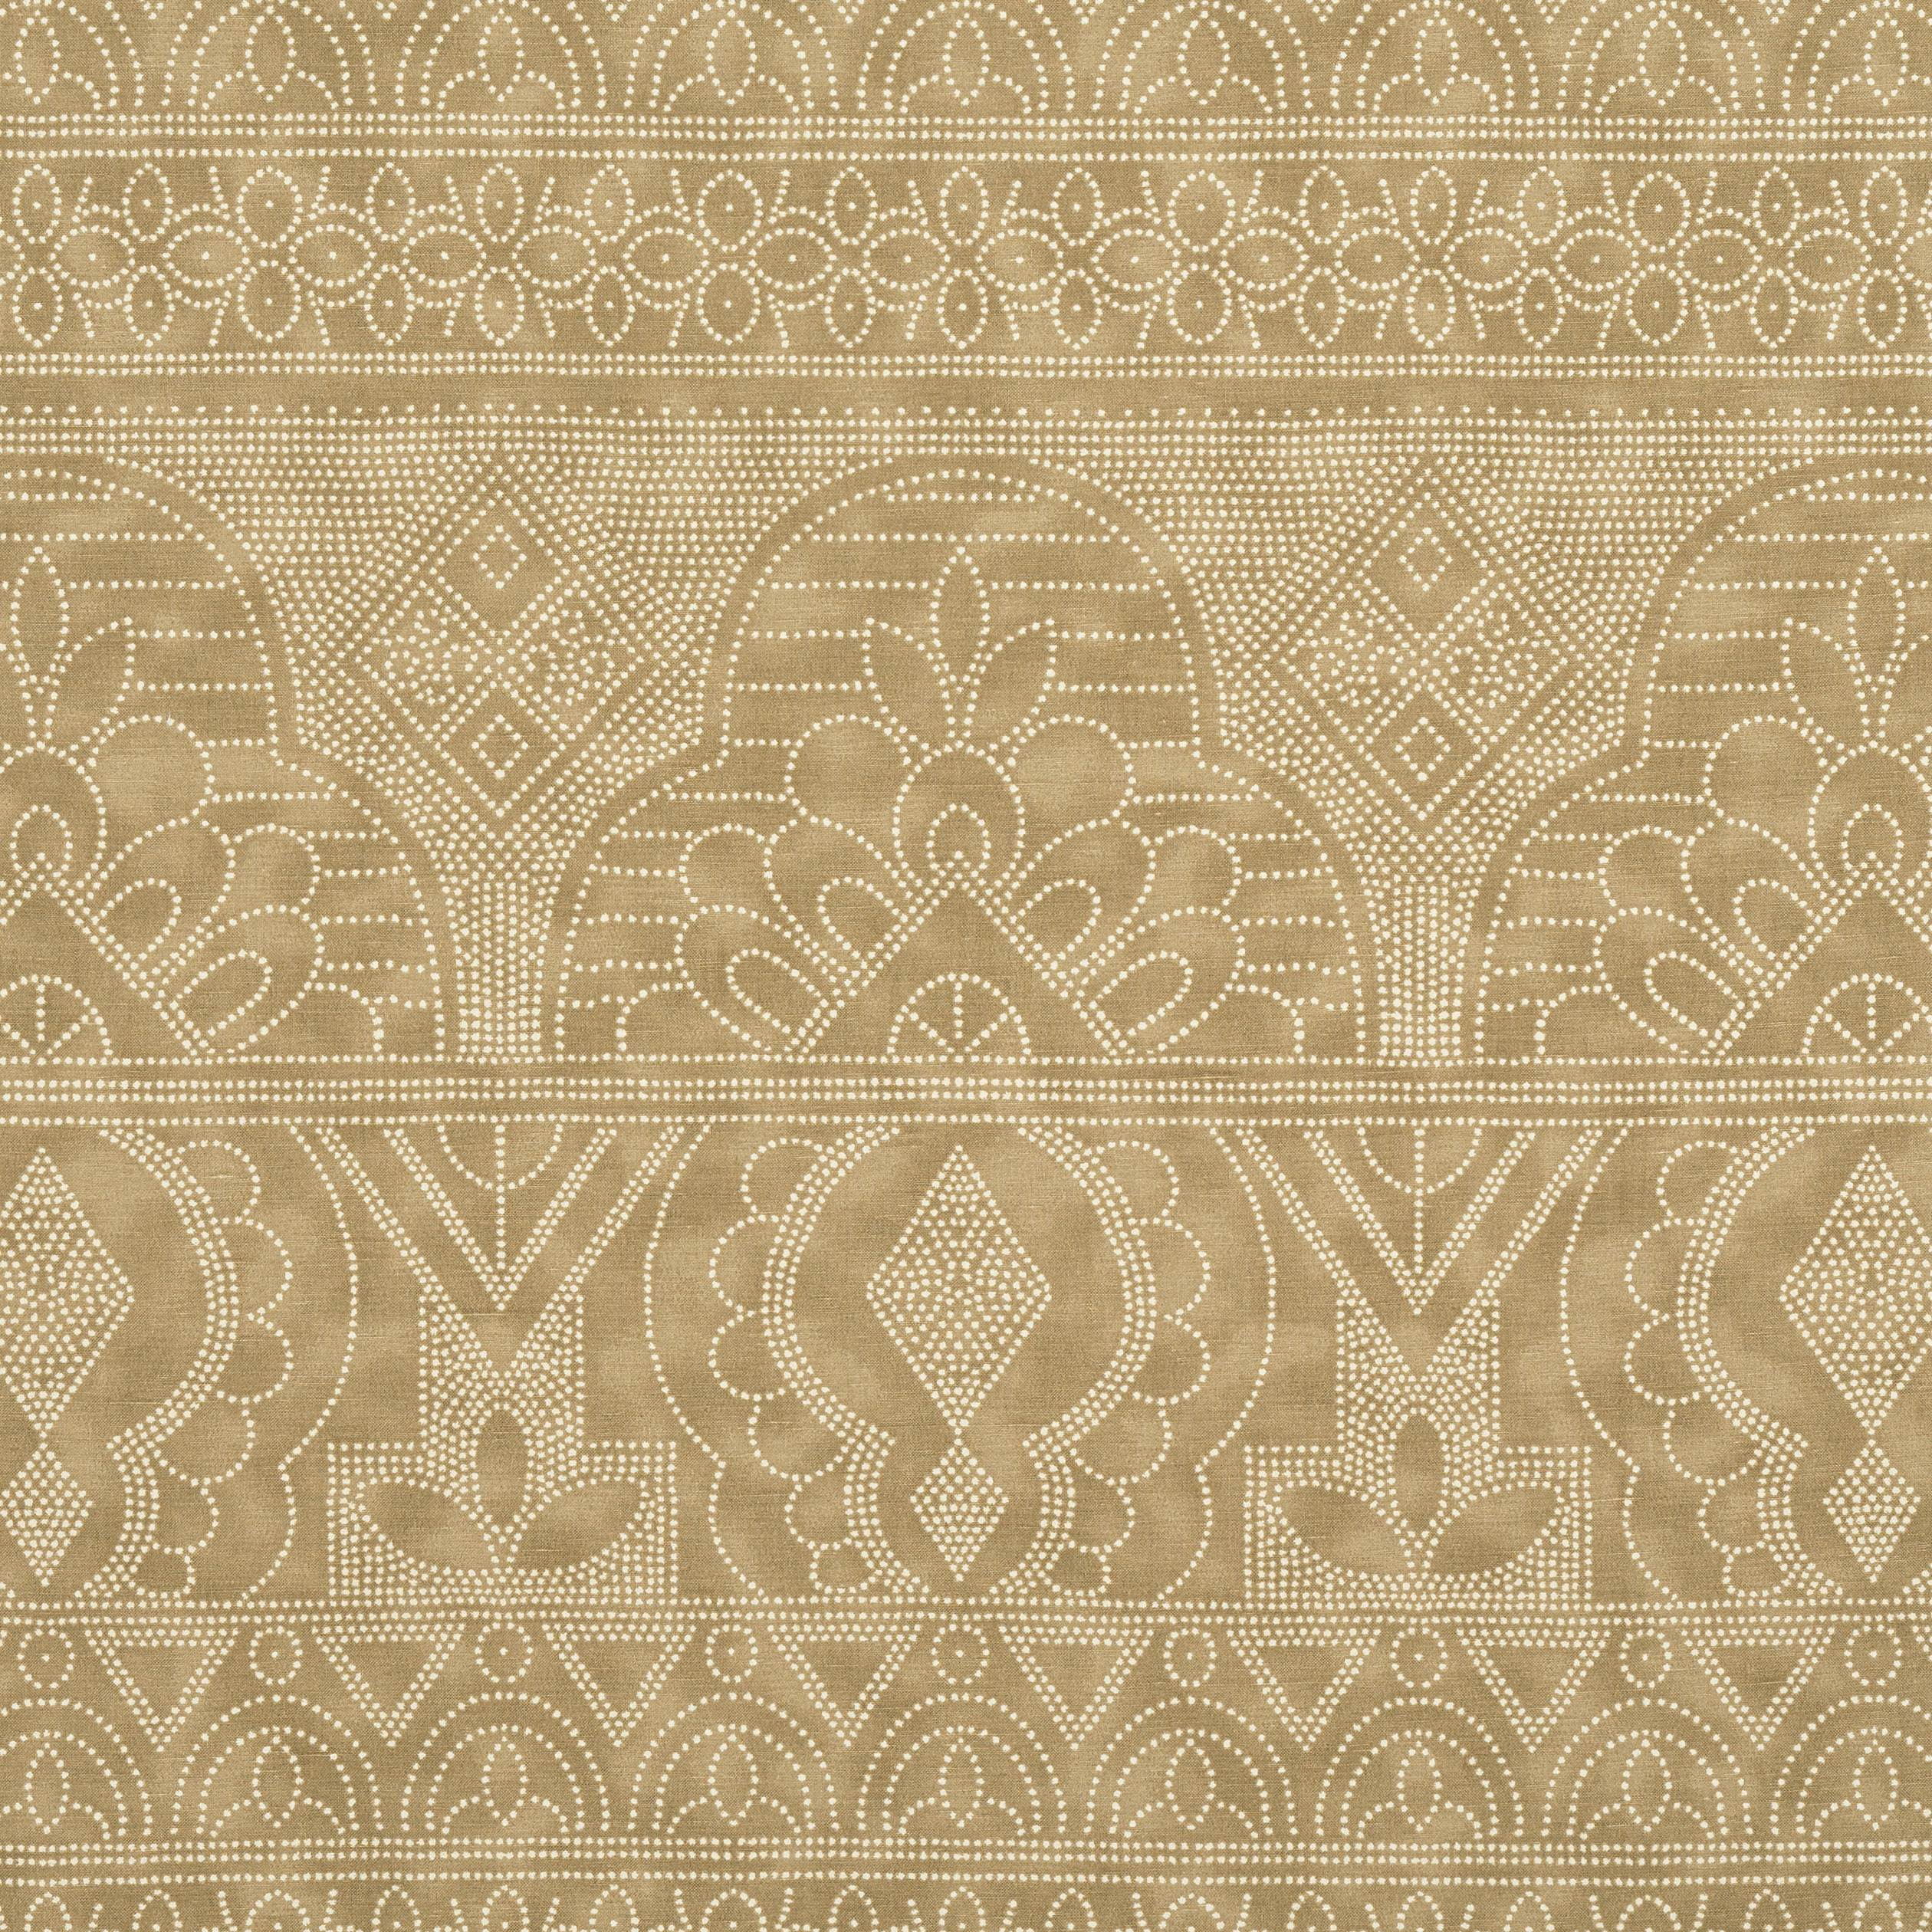 F981301 MEDINAS Printed Fabrics Camel from the Thibaut Montecito collection